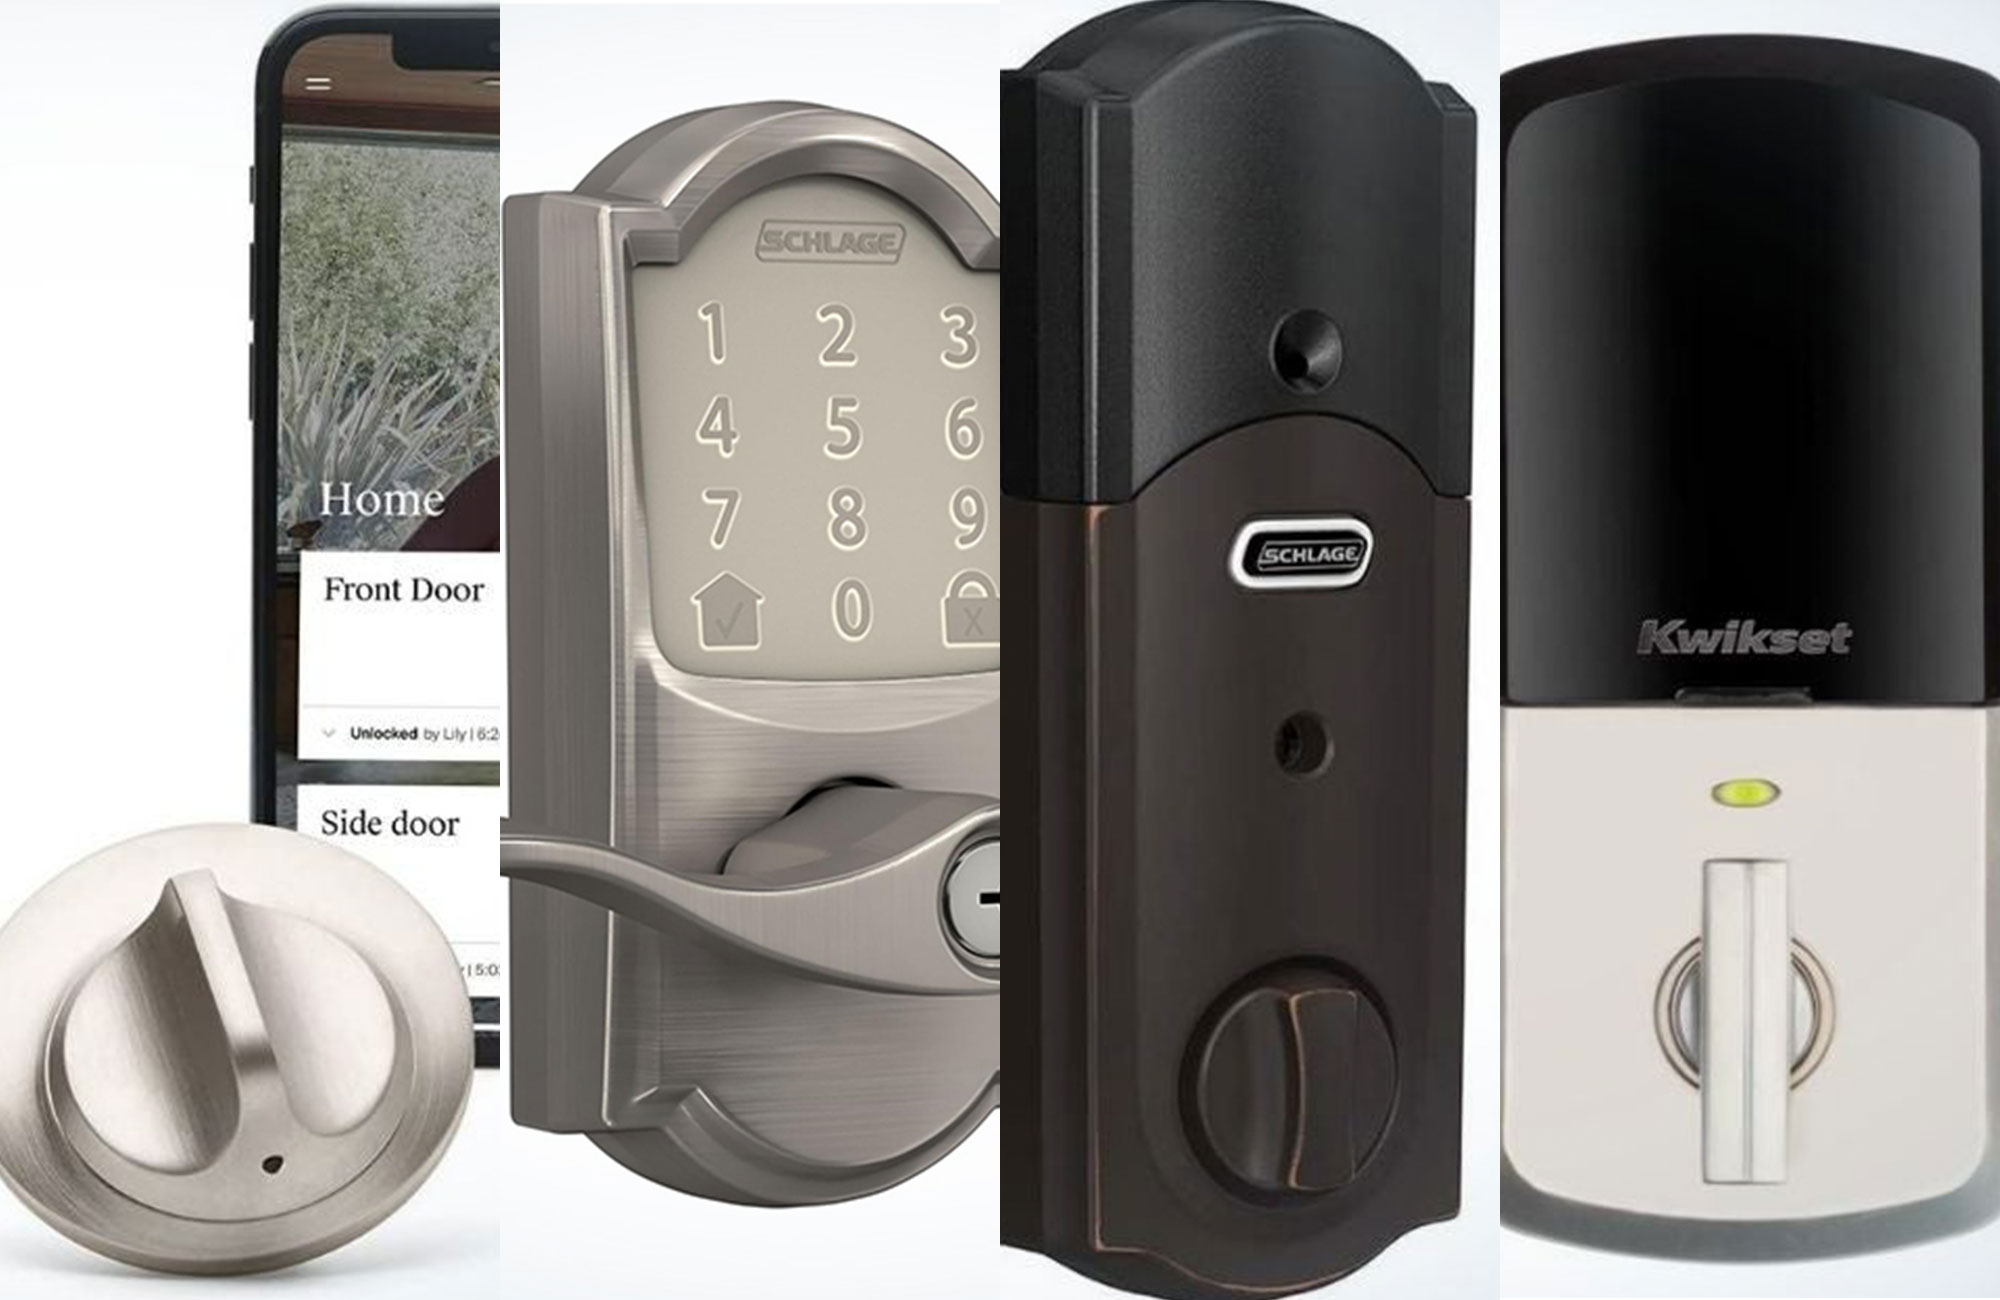 I've tried many smart locks, but the one I keep on my door is $30